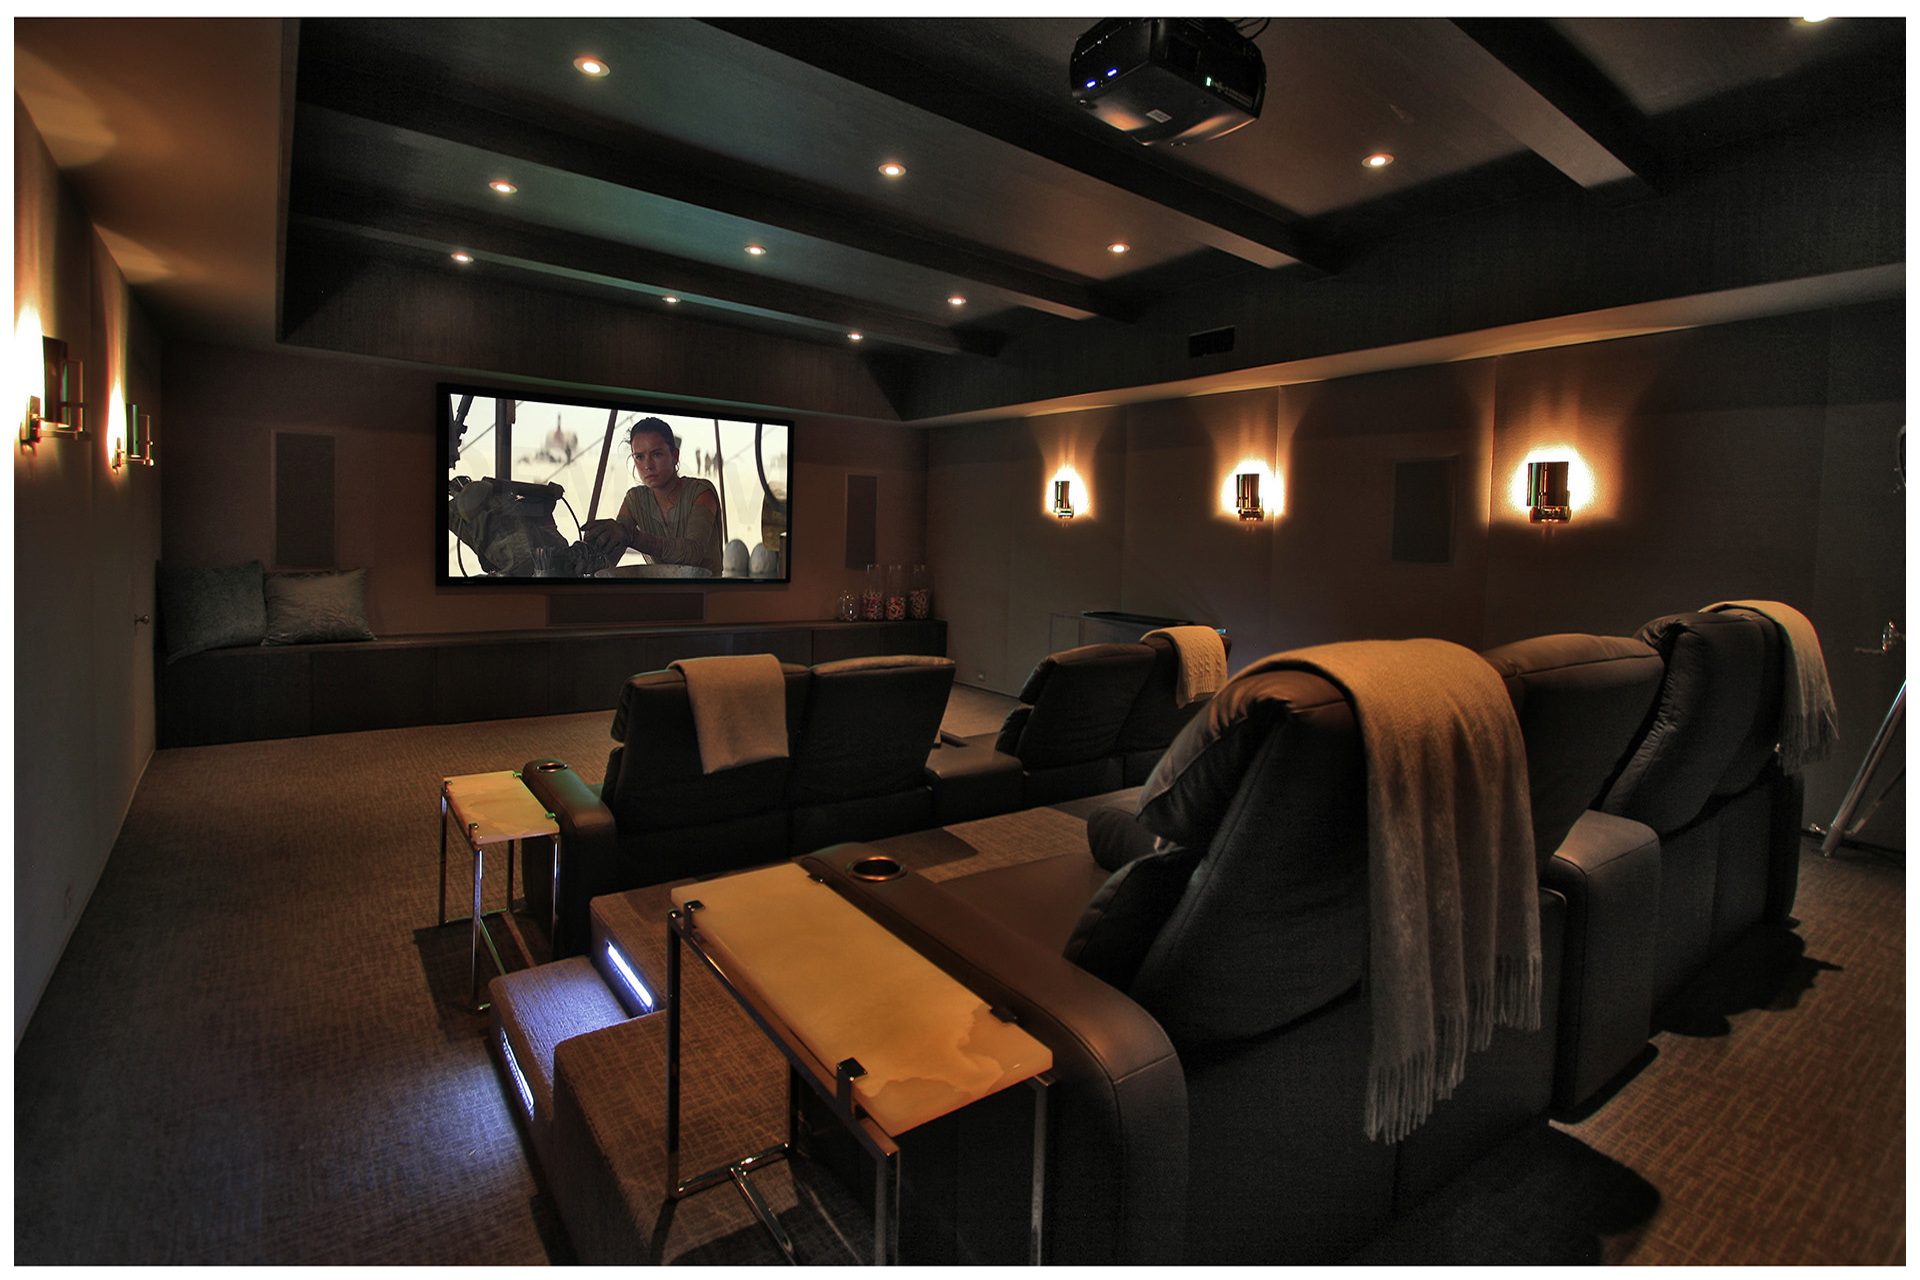 THEATER IN A DEDICATED ROOMThe before and after picture illustrate how two interconnected rooms in a finished basement were joined and subsequently turned into a dedicated basement theater.Special treatment of the ceiling limited intrusion of sound into upper floor. Theater features JBL Synthesis audio elements and a Digital Projections projector.